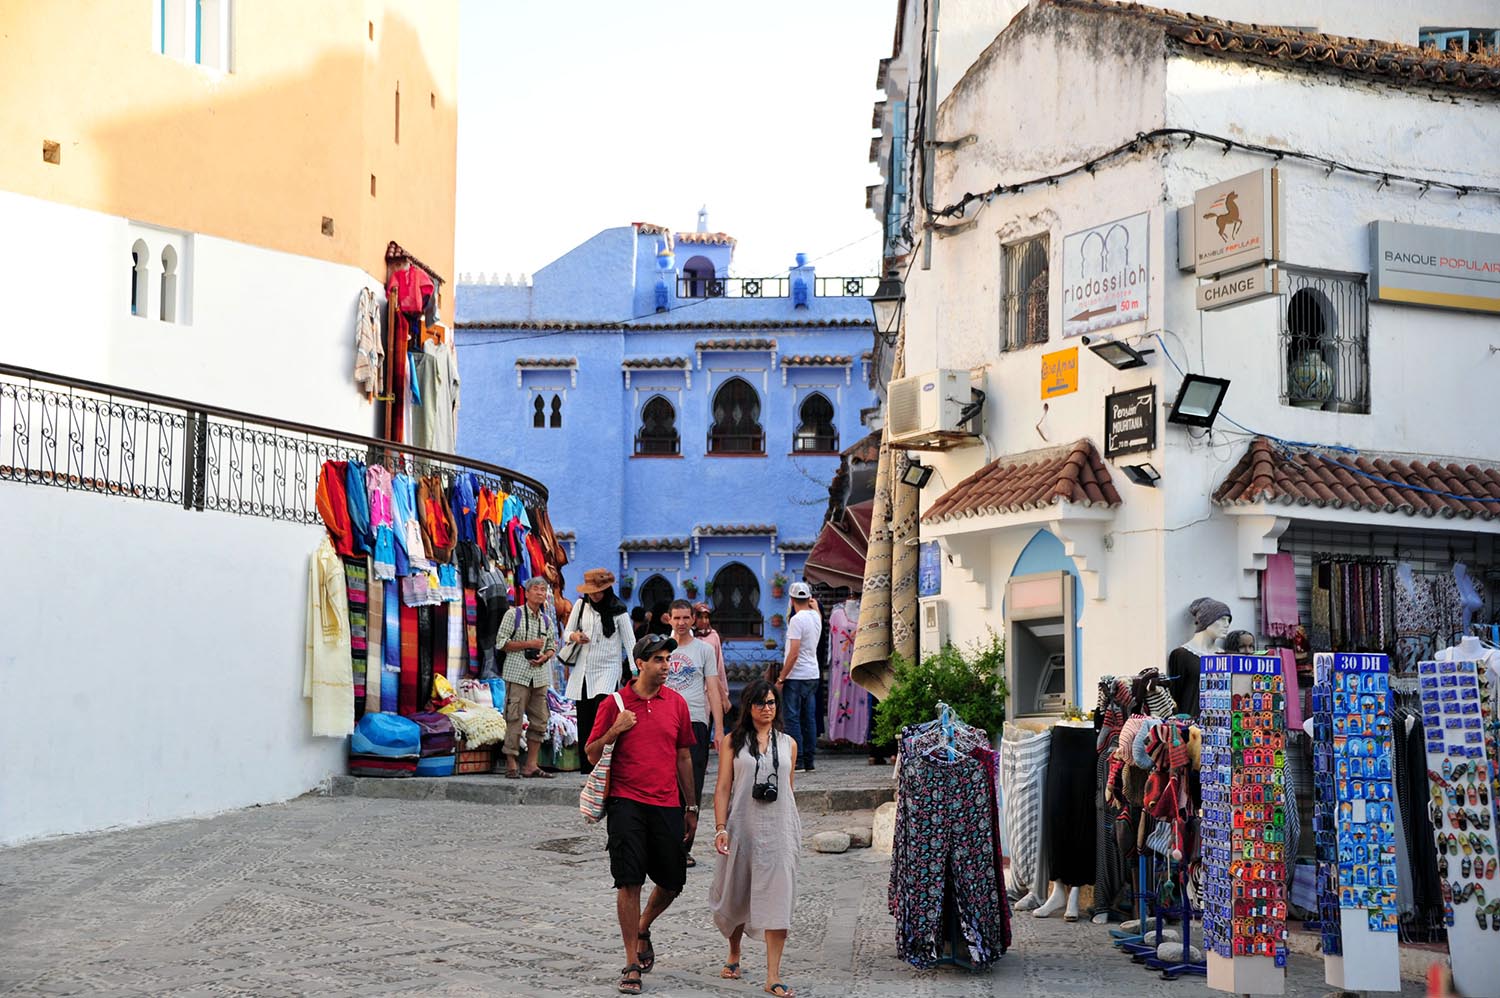 Tourists wandering in the streets of Chefchaouen